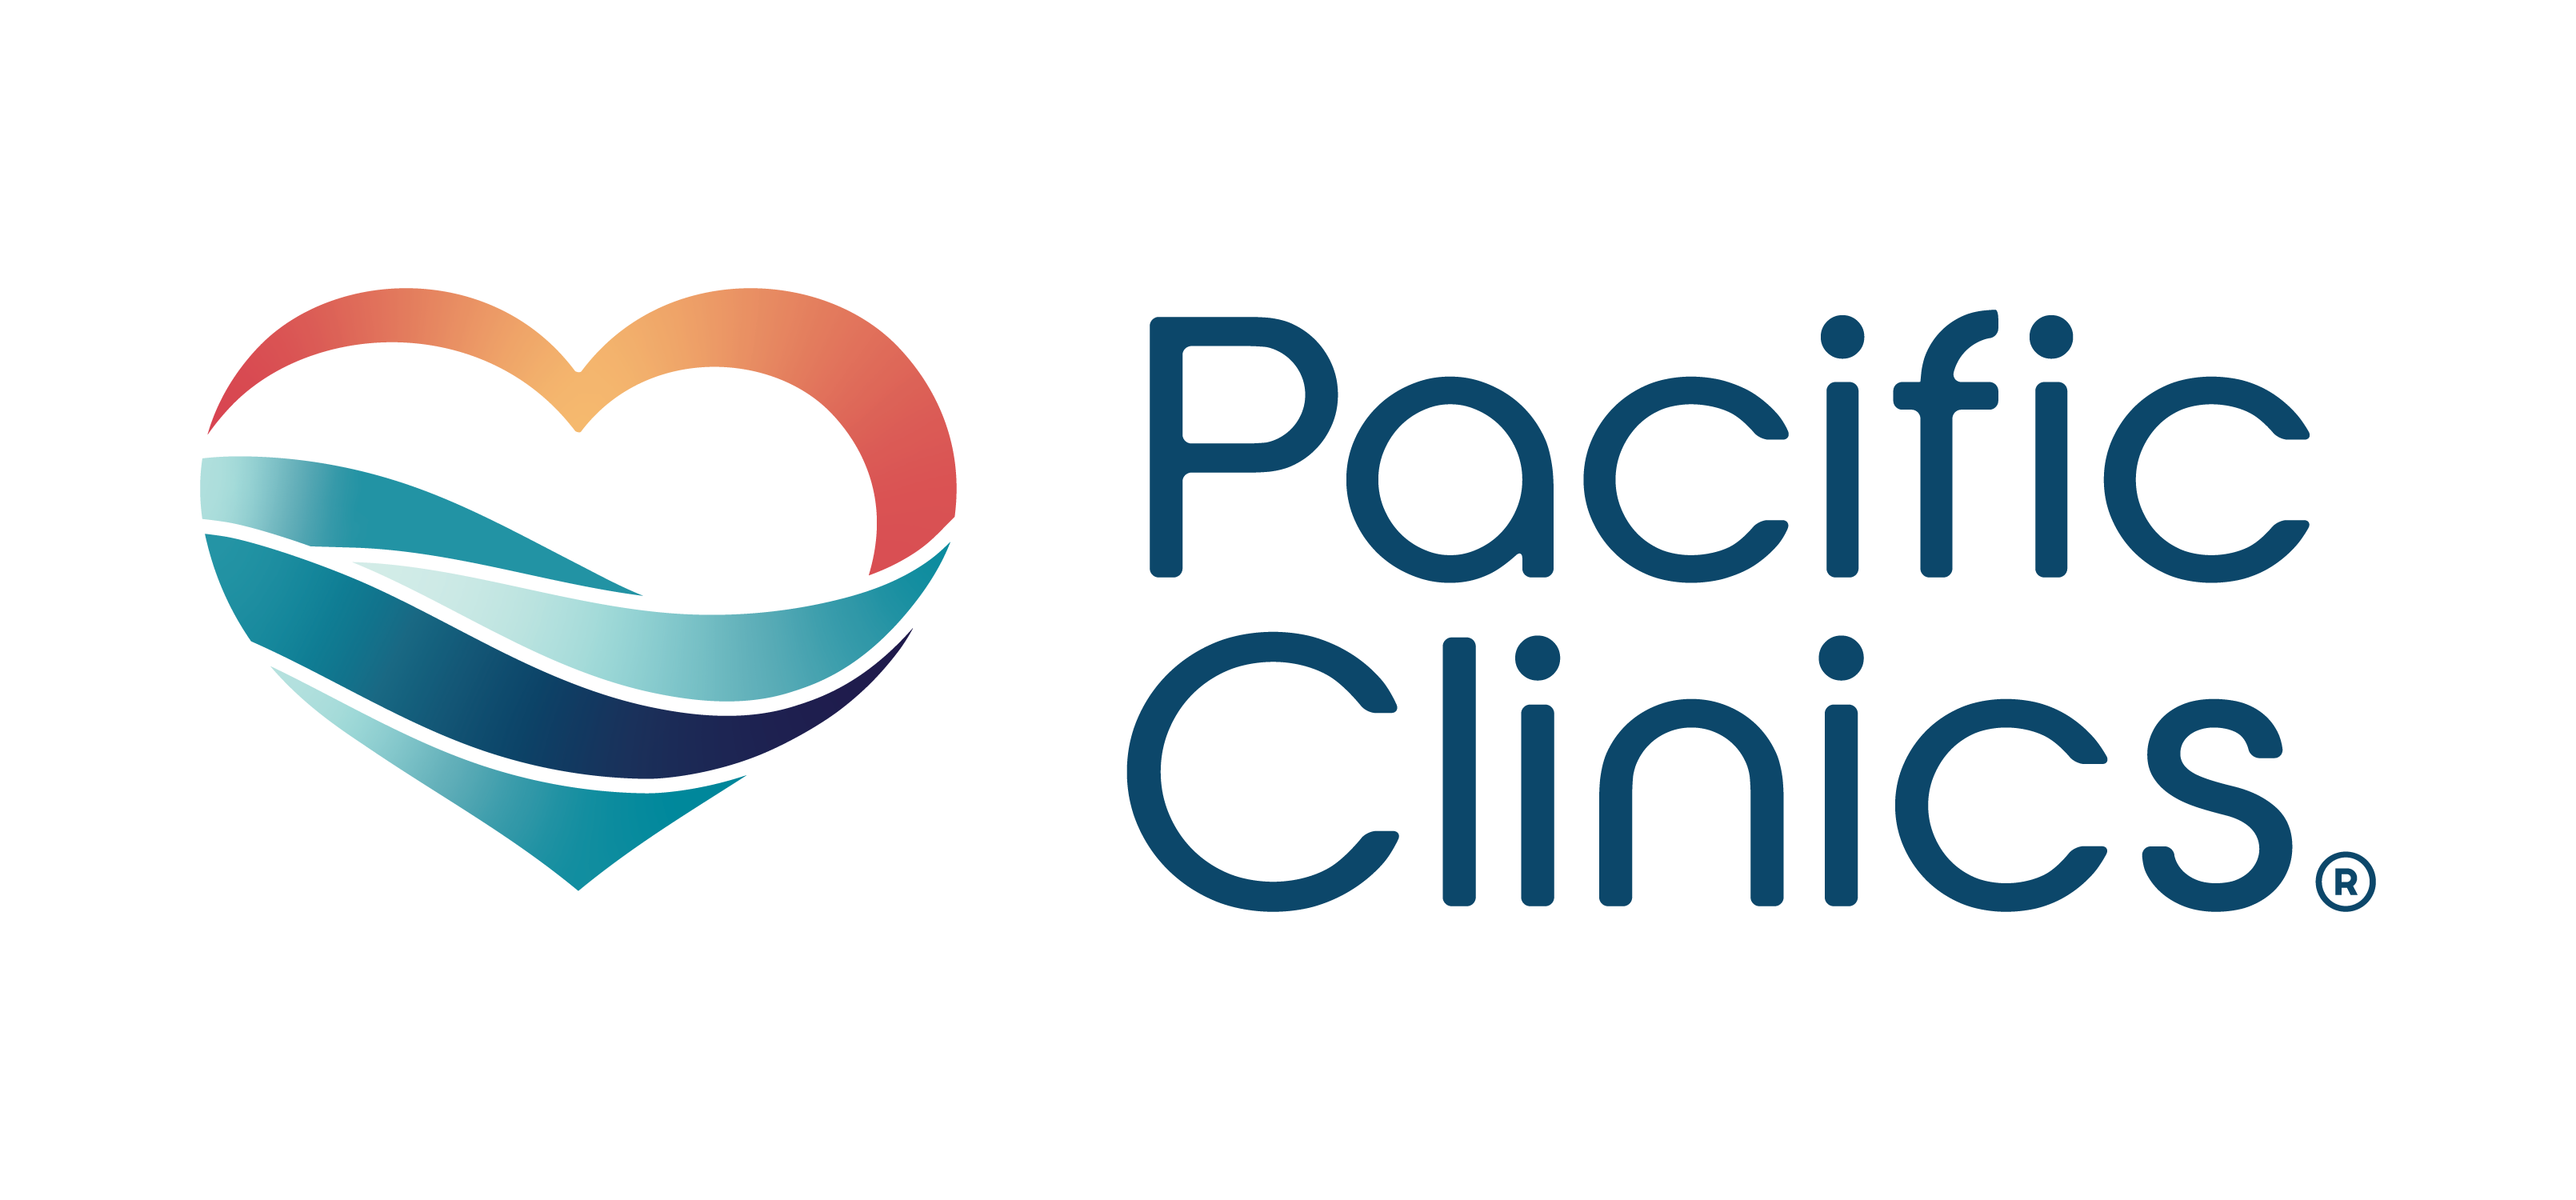 Pacific Clinics, A Merger of Uplift Family Services and Pacific Clinics